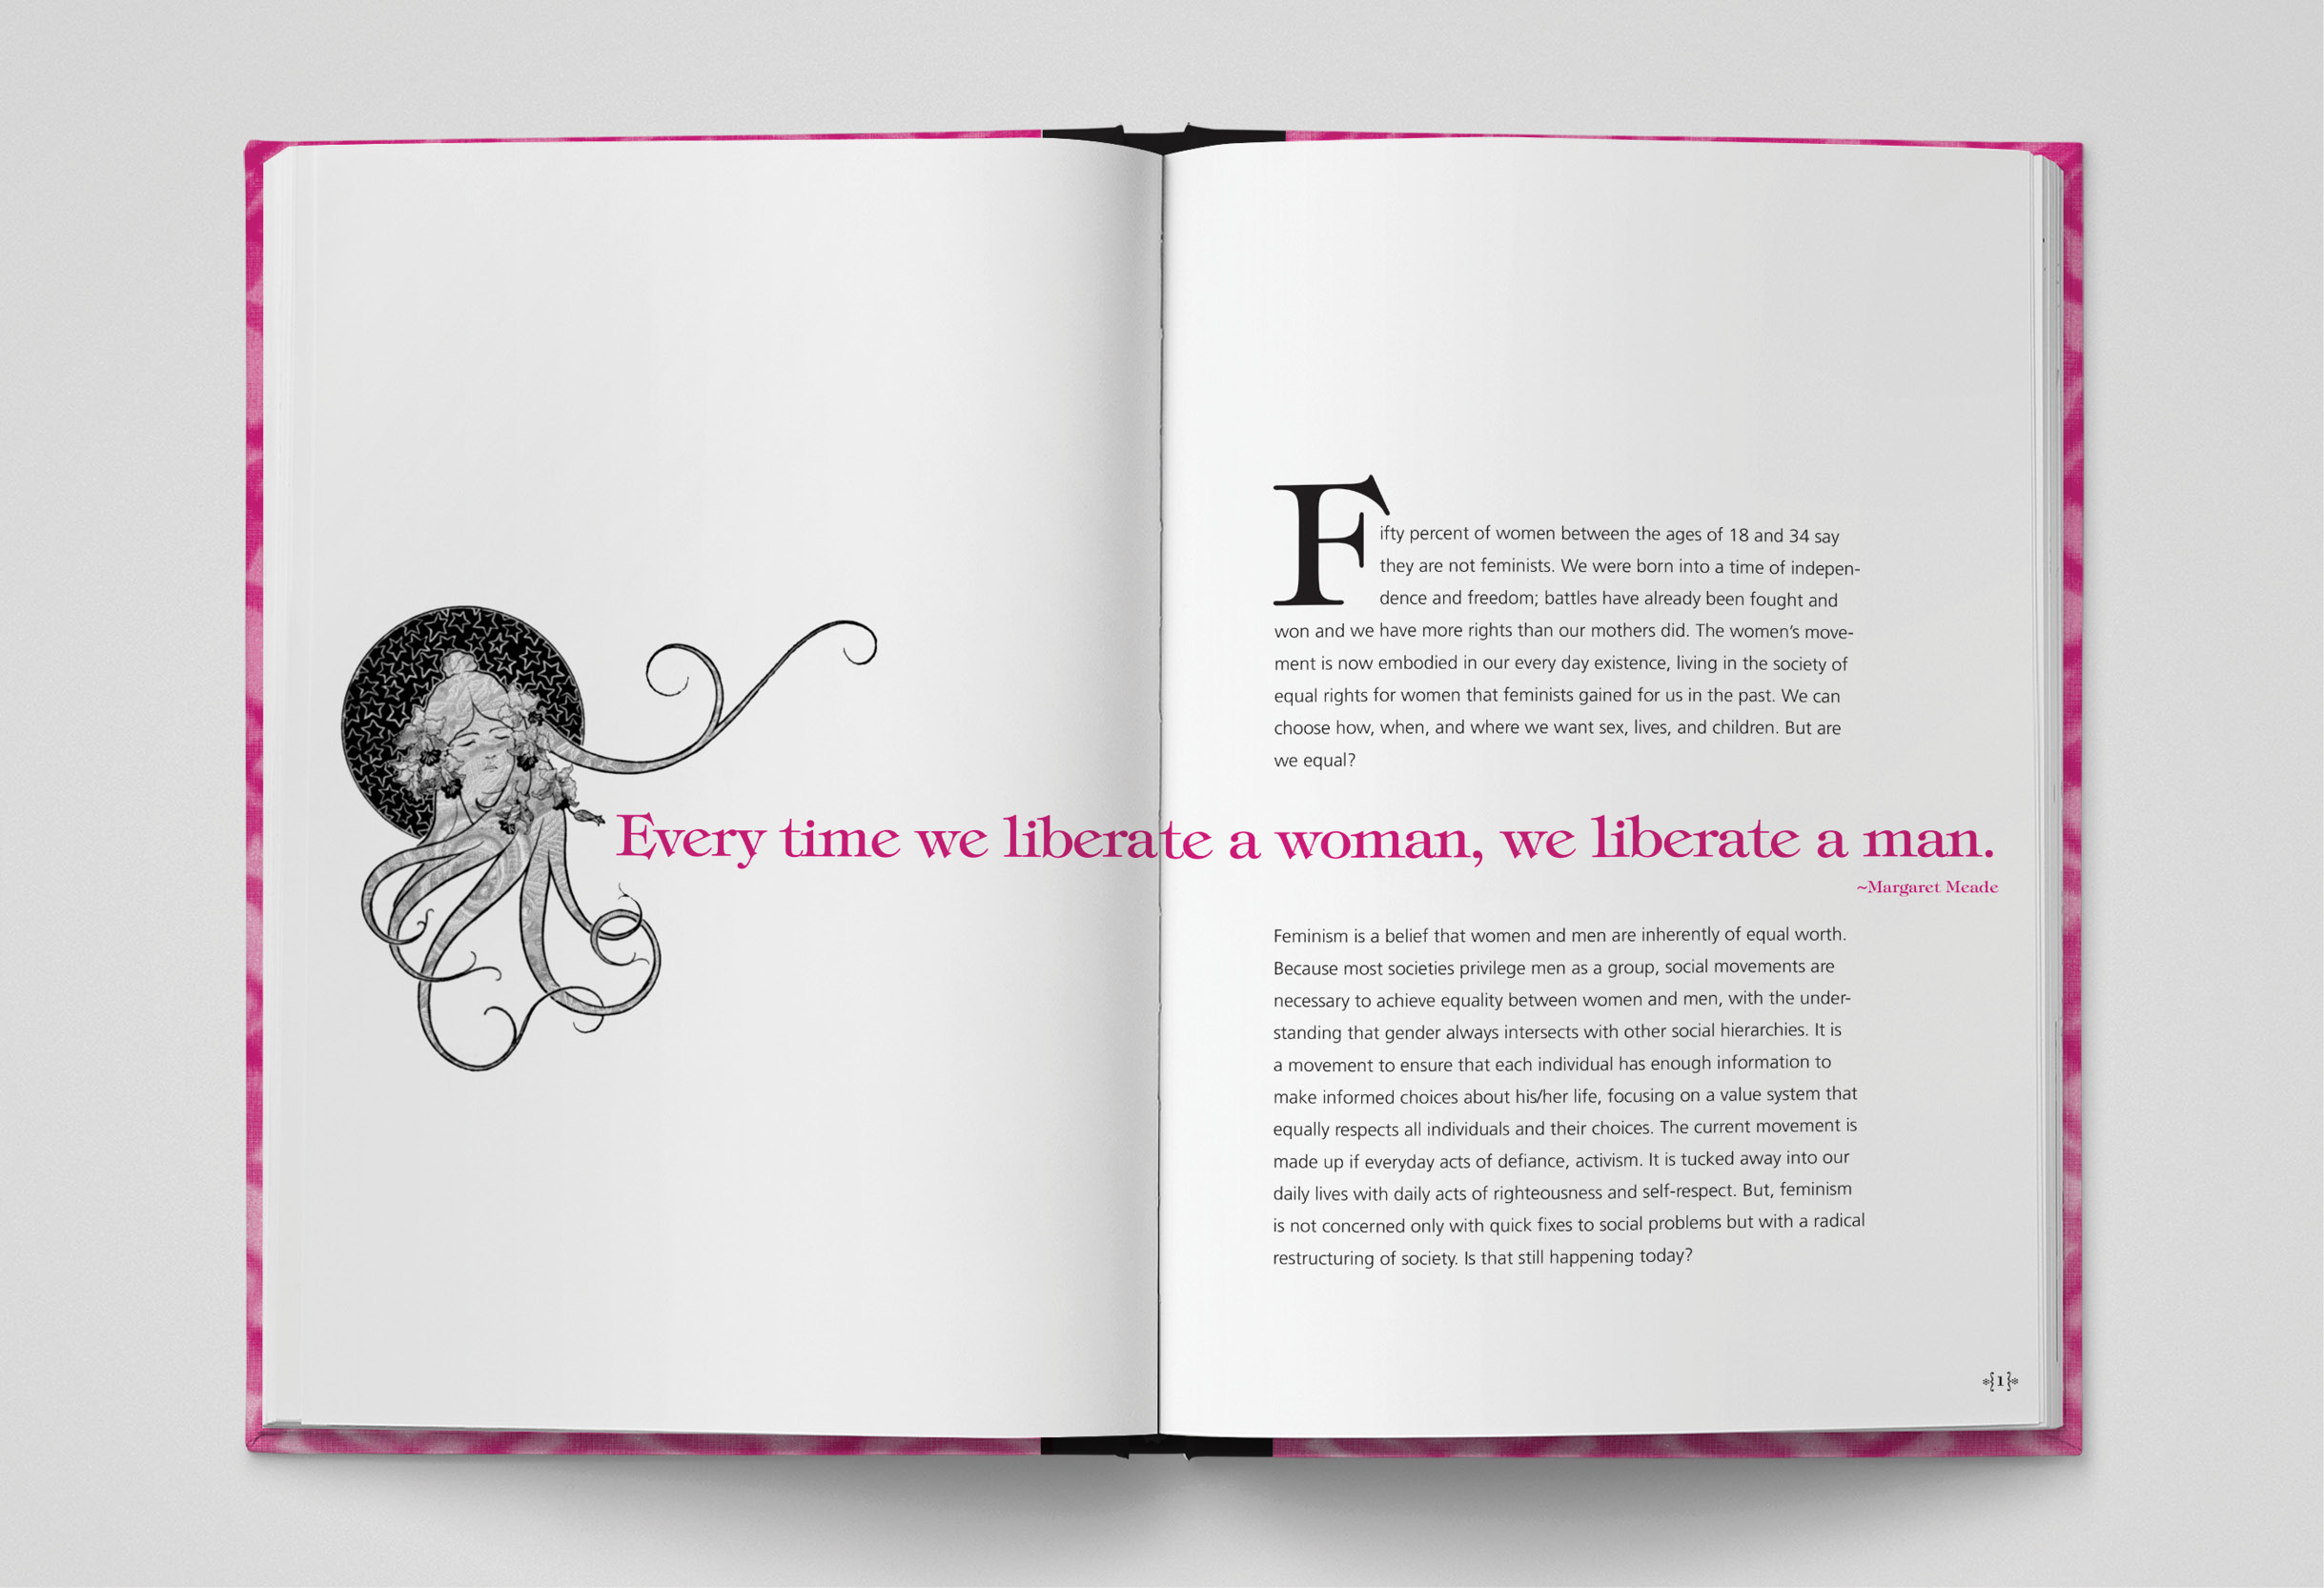 Interior spread of the book. Left hand page is mostly white with a black etching illustration of a woman and set in a transitional serif typeface, in magenta the Margaret Meade quote: ‘Every time we liberate a woman, we liberate a man’. The quote crosses the gutter onto the next page. The right hand page shows a one column page of copy with the quote bisecting it horizontally.